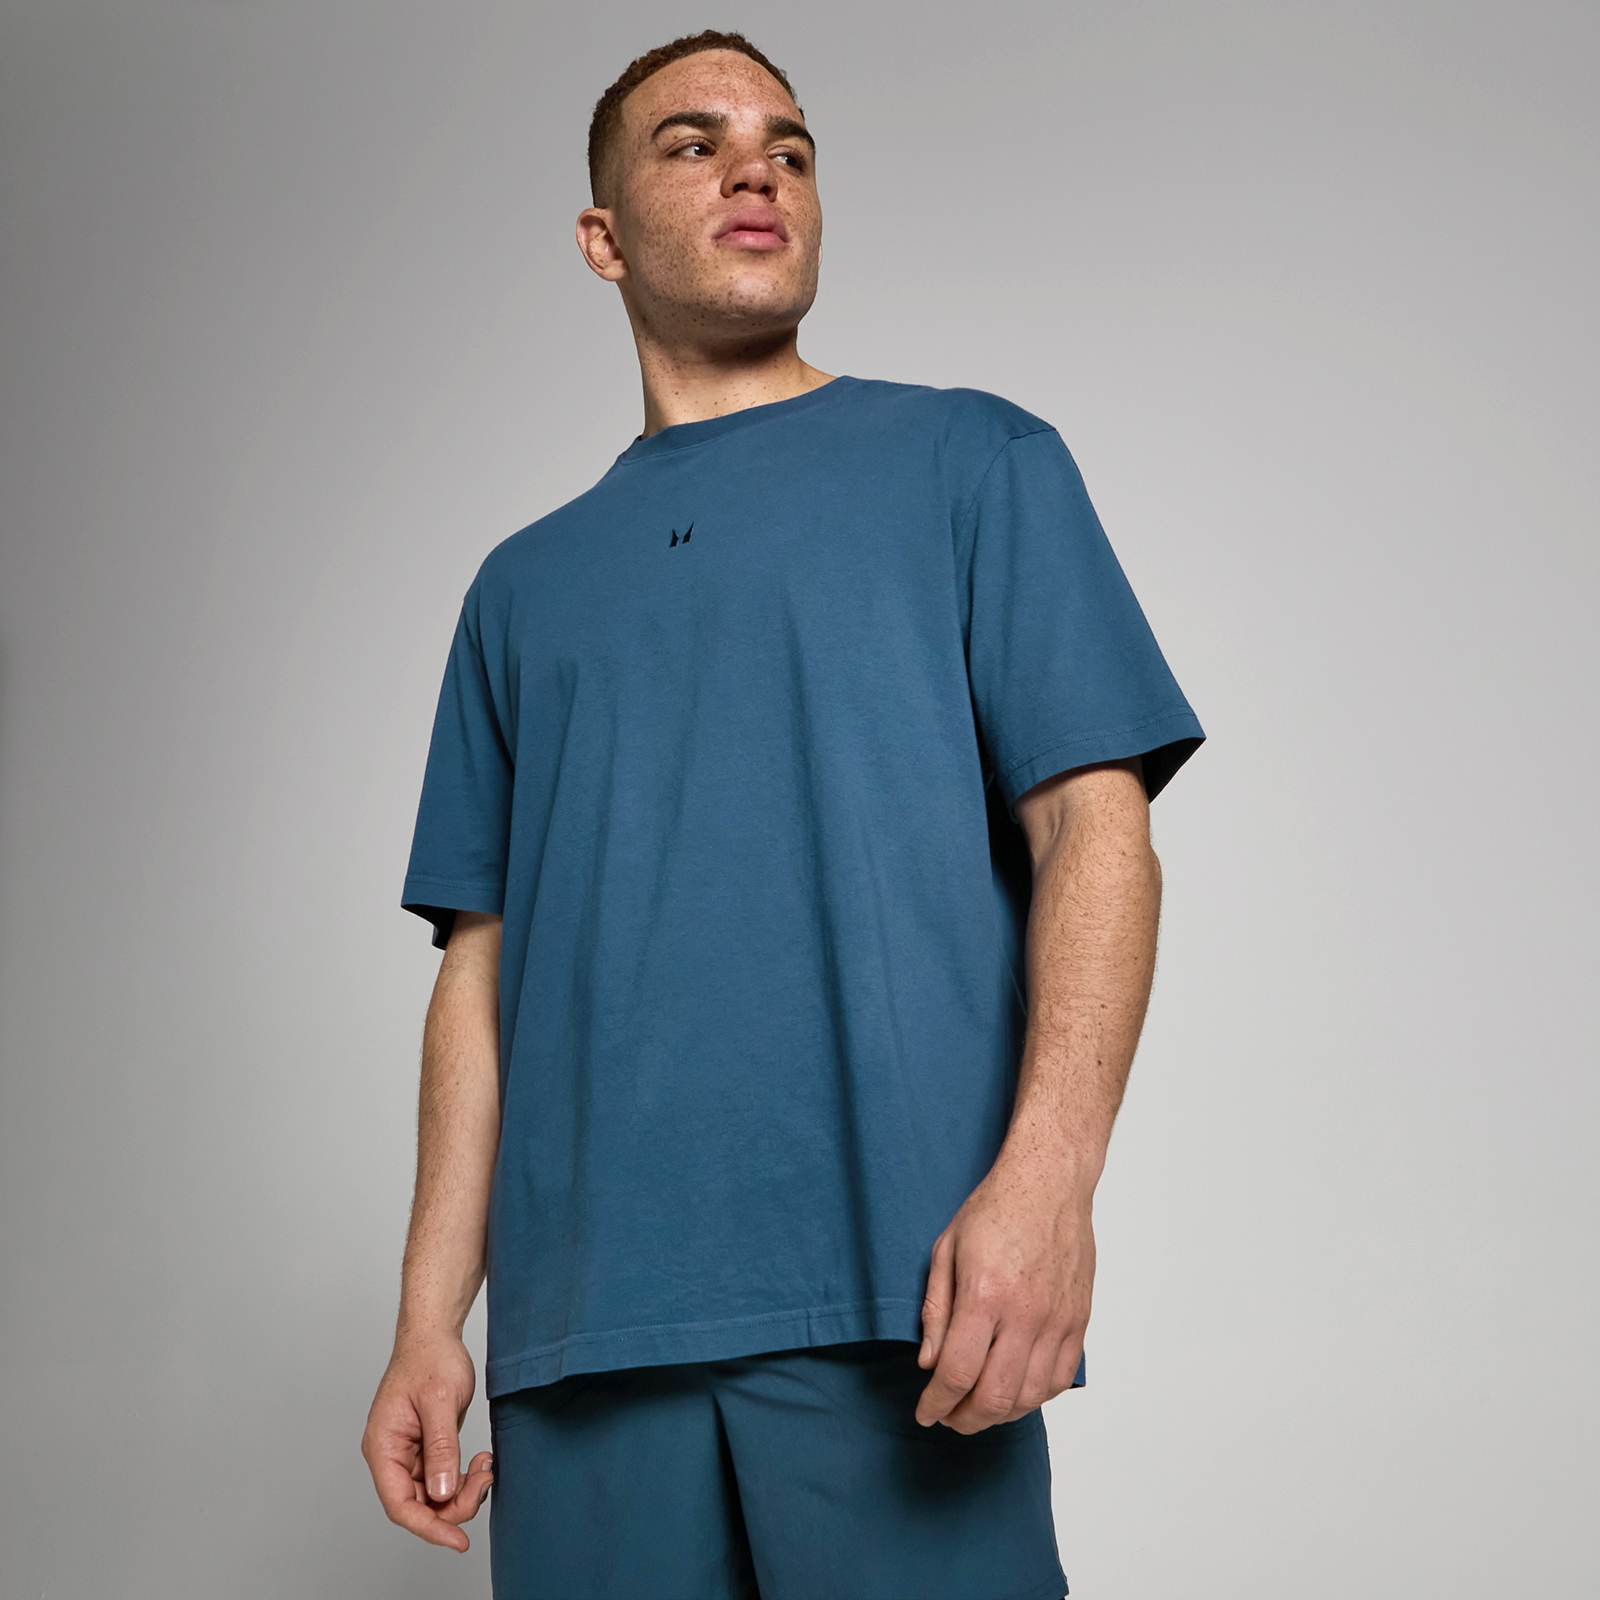 MP Men's Tempo Oversized Washed T-Shirt - Washed Navy - M von MP